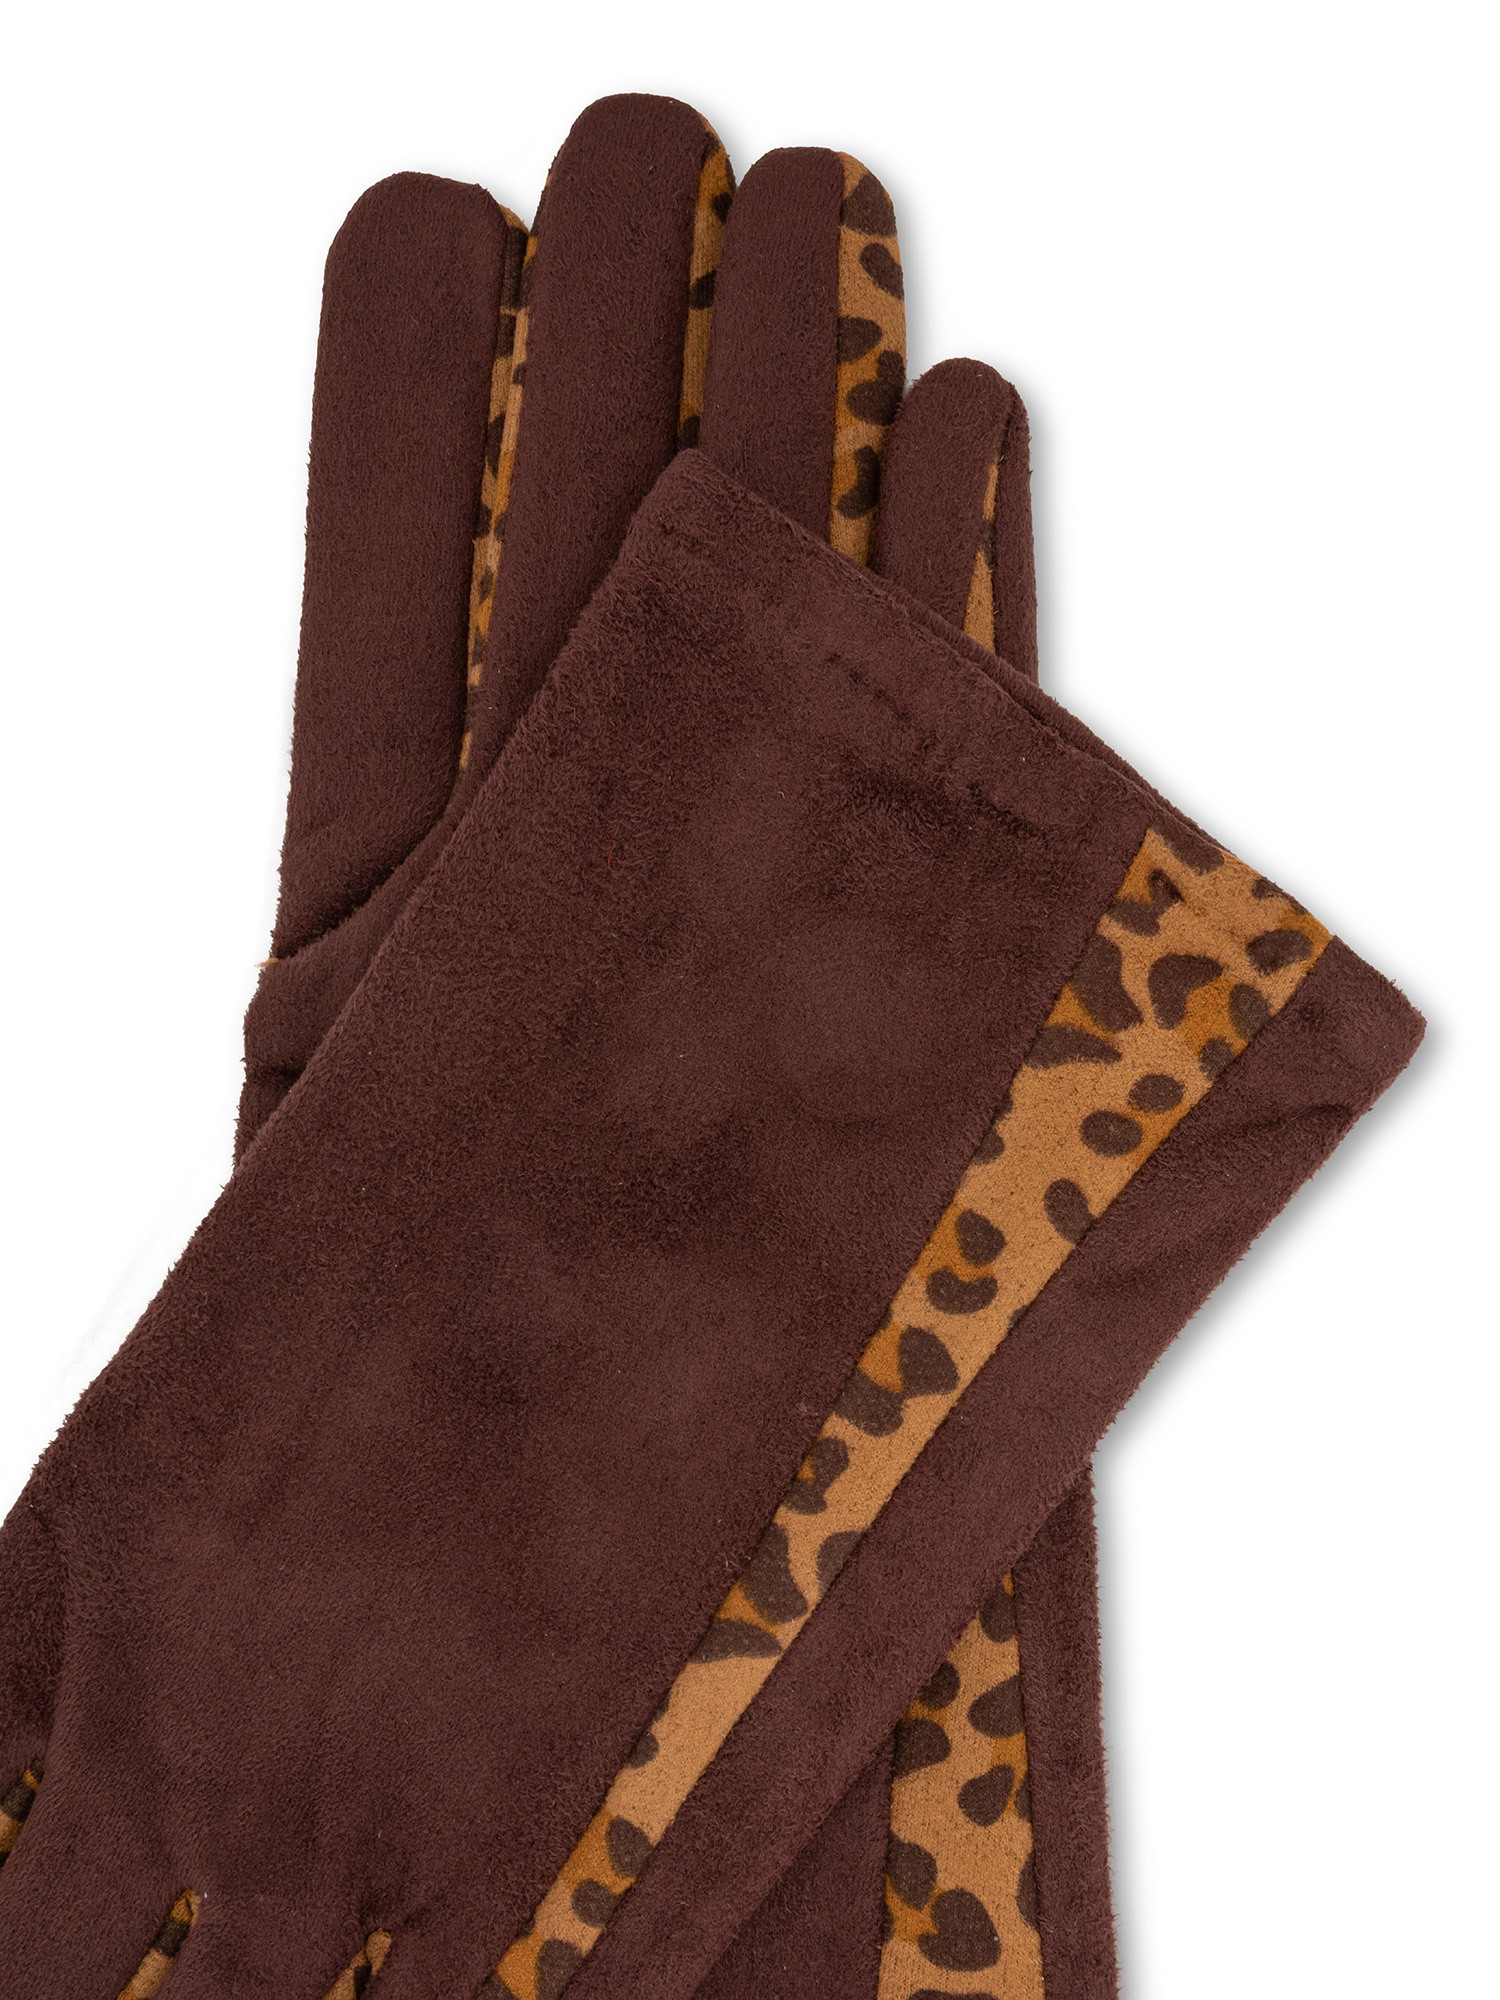 Koan - Gloves with animalier inserts, Brown, large image number 1